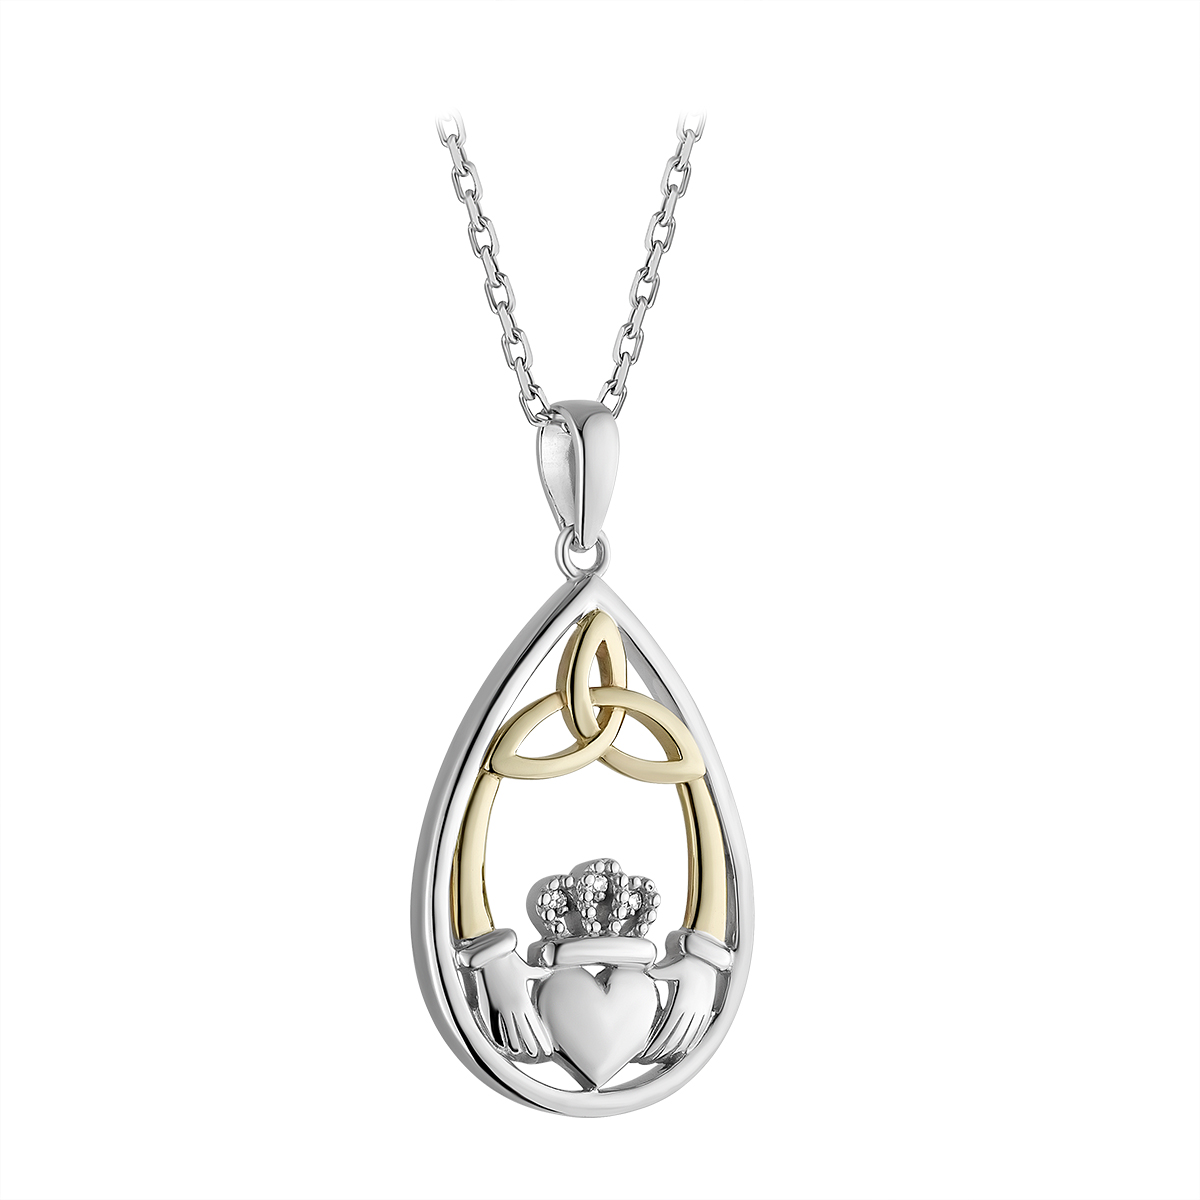 Product image for Irish Necklace | Diamond Sterling Silver 10k Yellow Gold Claddagh Trinity Knot Pendant